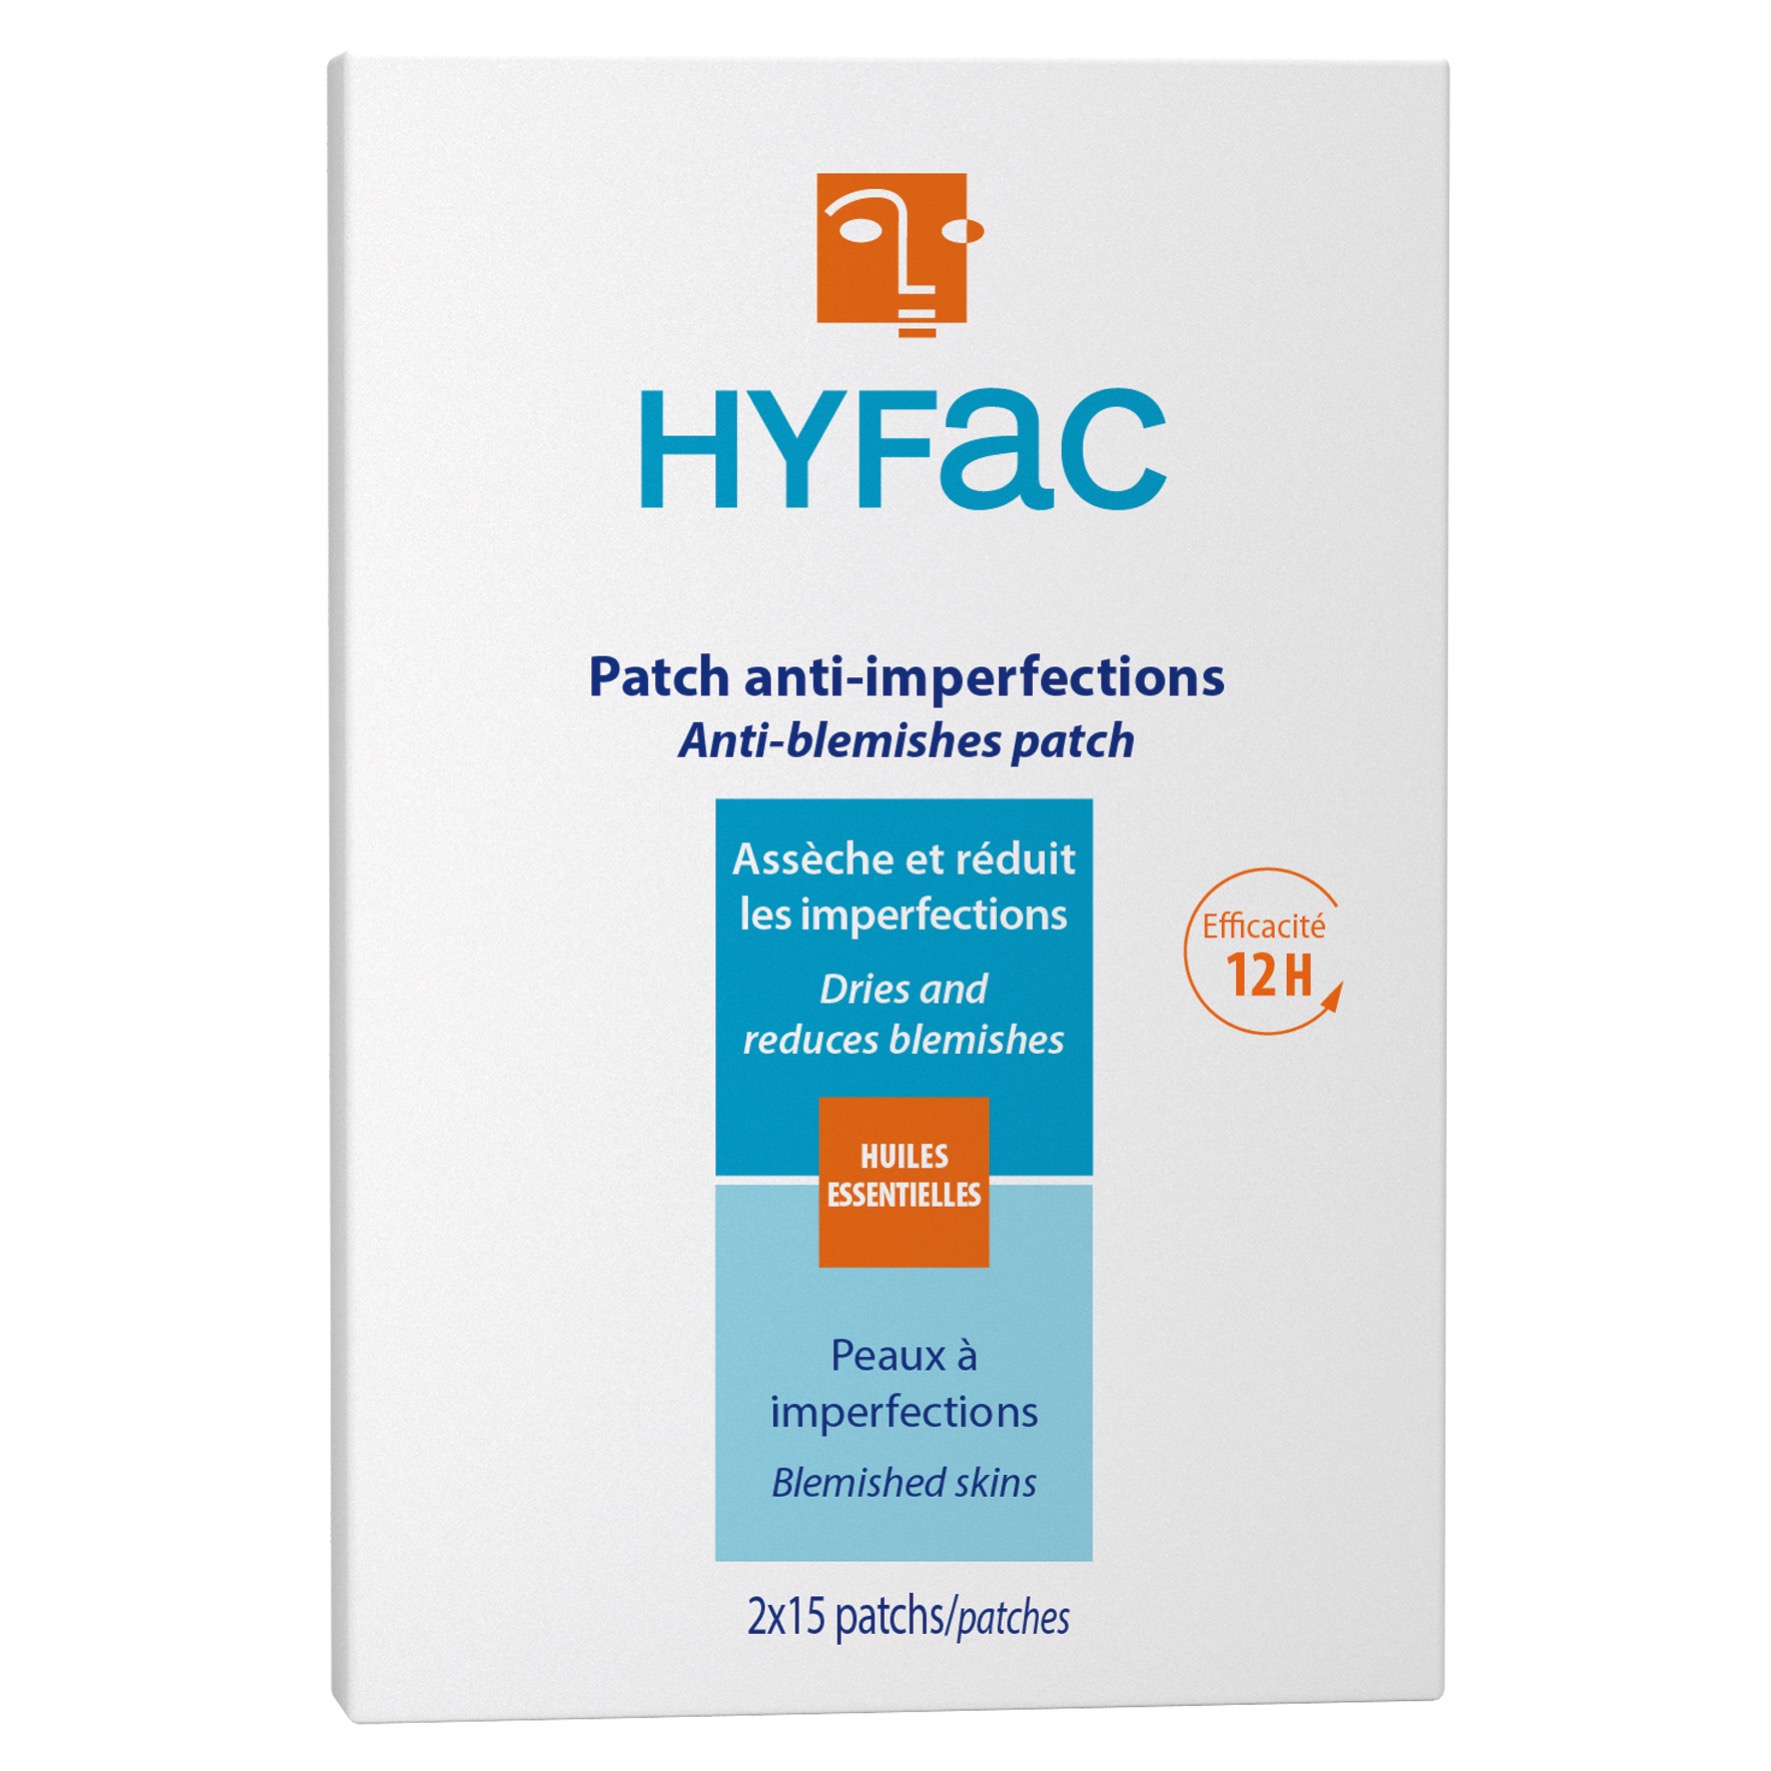 HYFAC Anti-Imperfection Patch dries out pimples